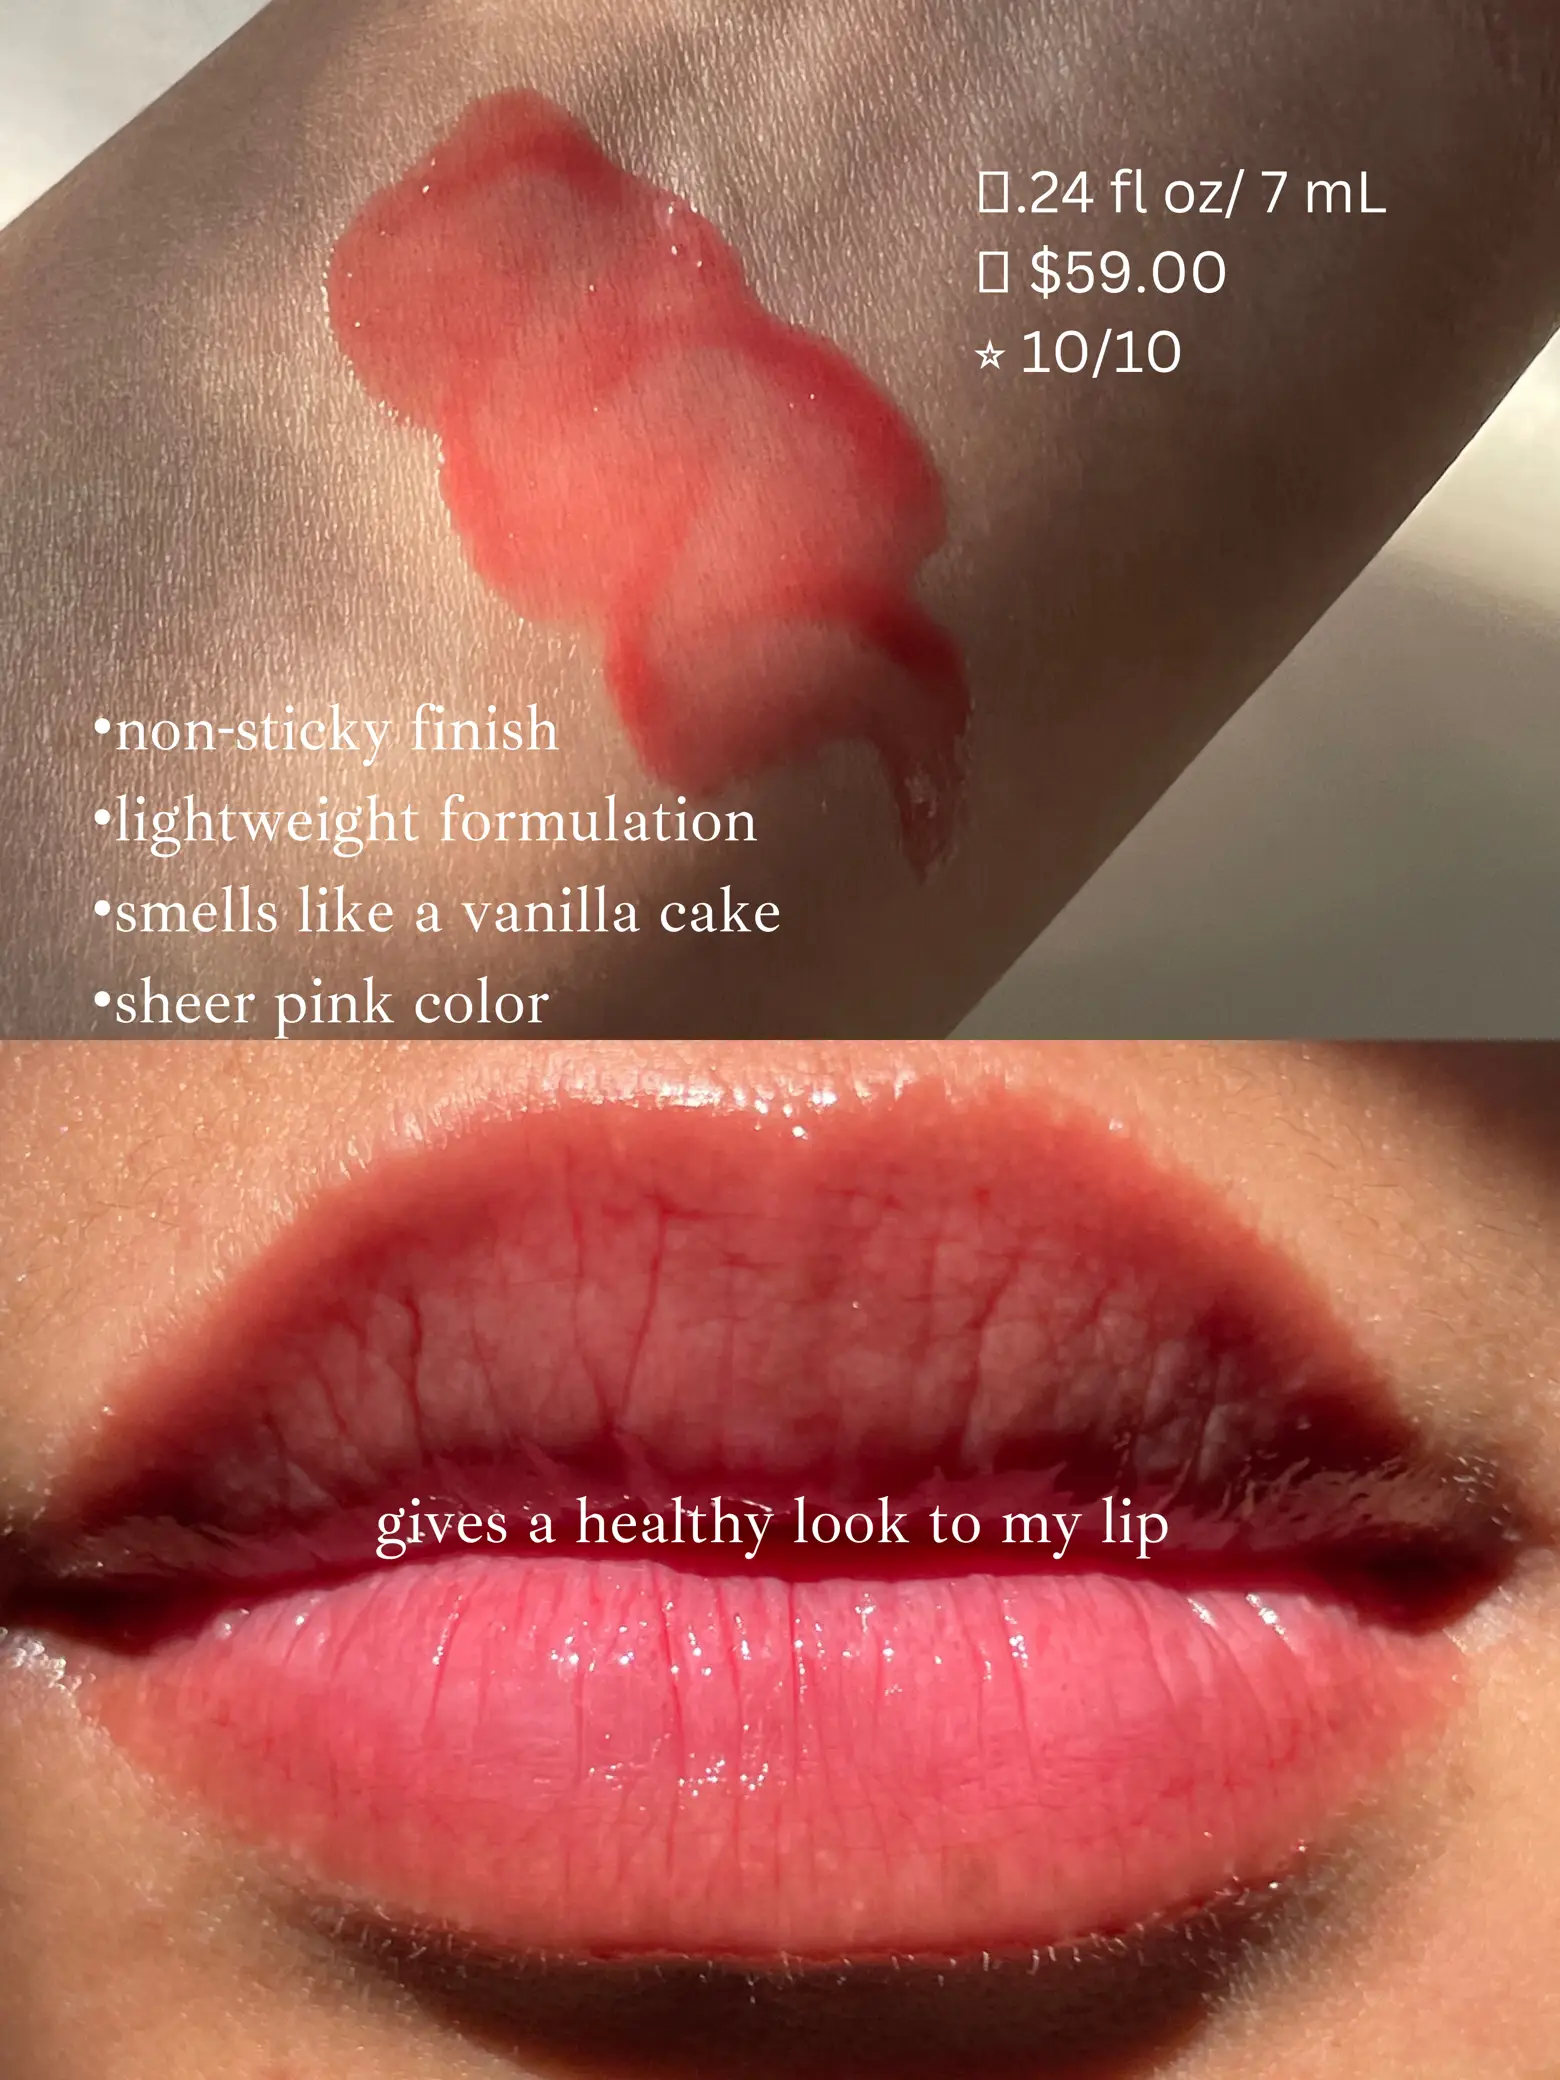 Oh - So Luxe Tinted Liquid Lip Balm For Lips, Cheeks, & Eyes With Intense  Hyderation Formullation For A Healthy Dose of Colour & Glossy Shine, Lightweight & Non Sticky